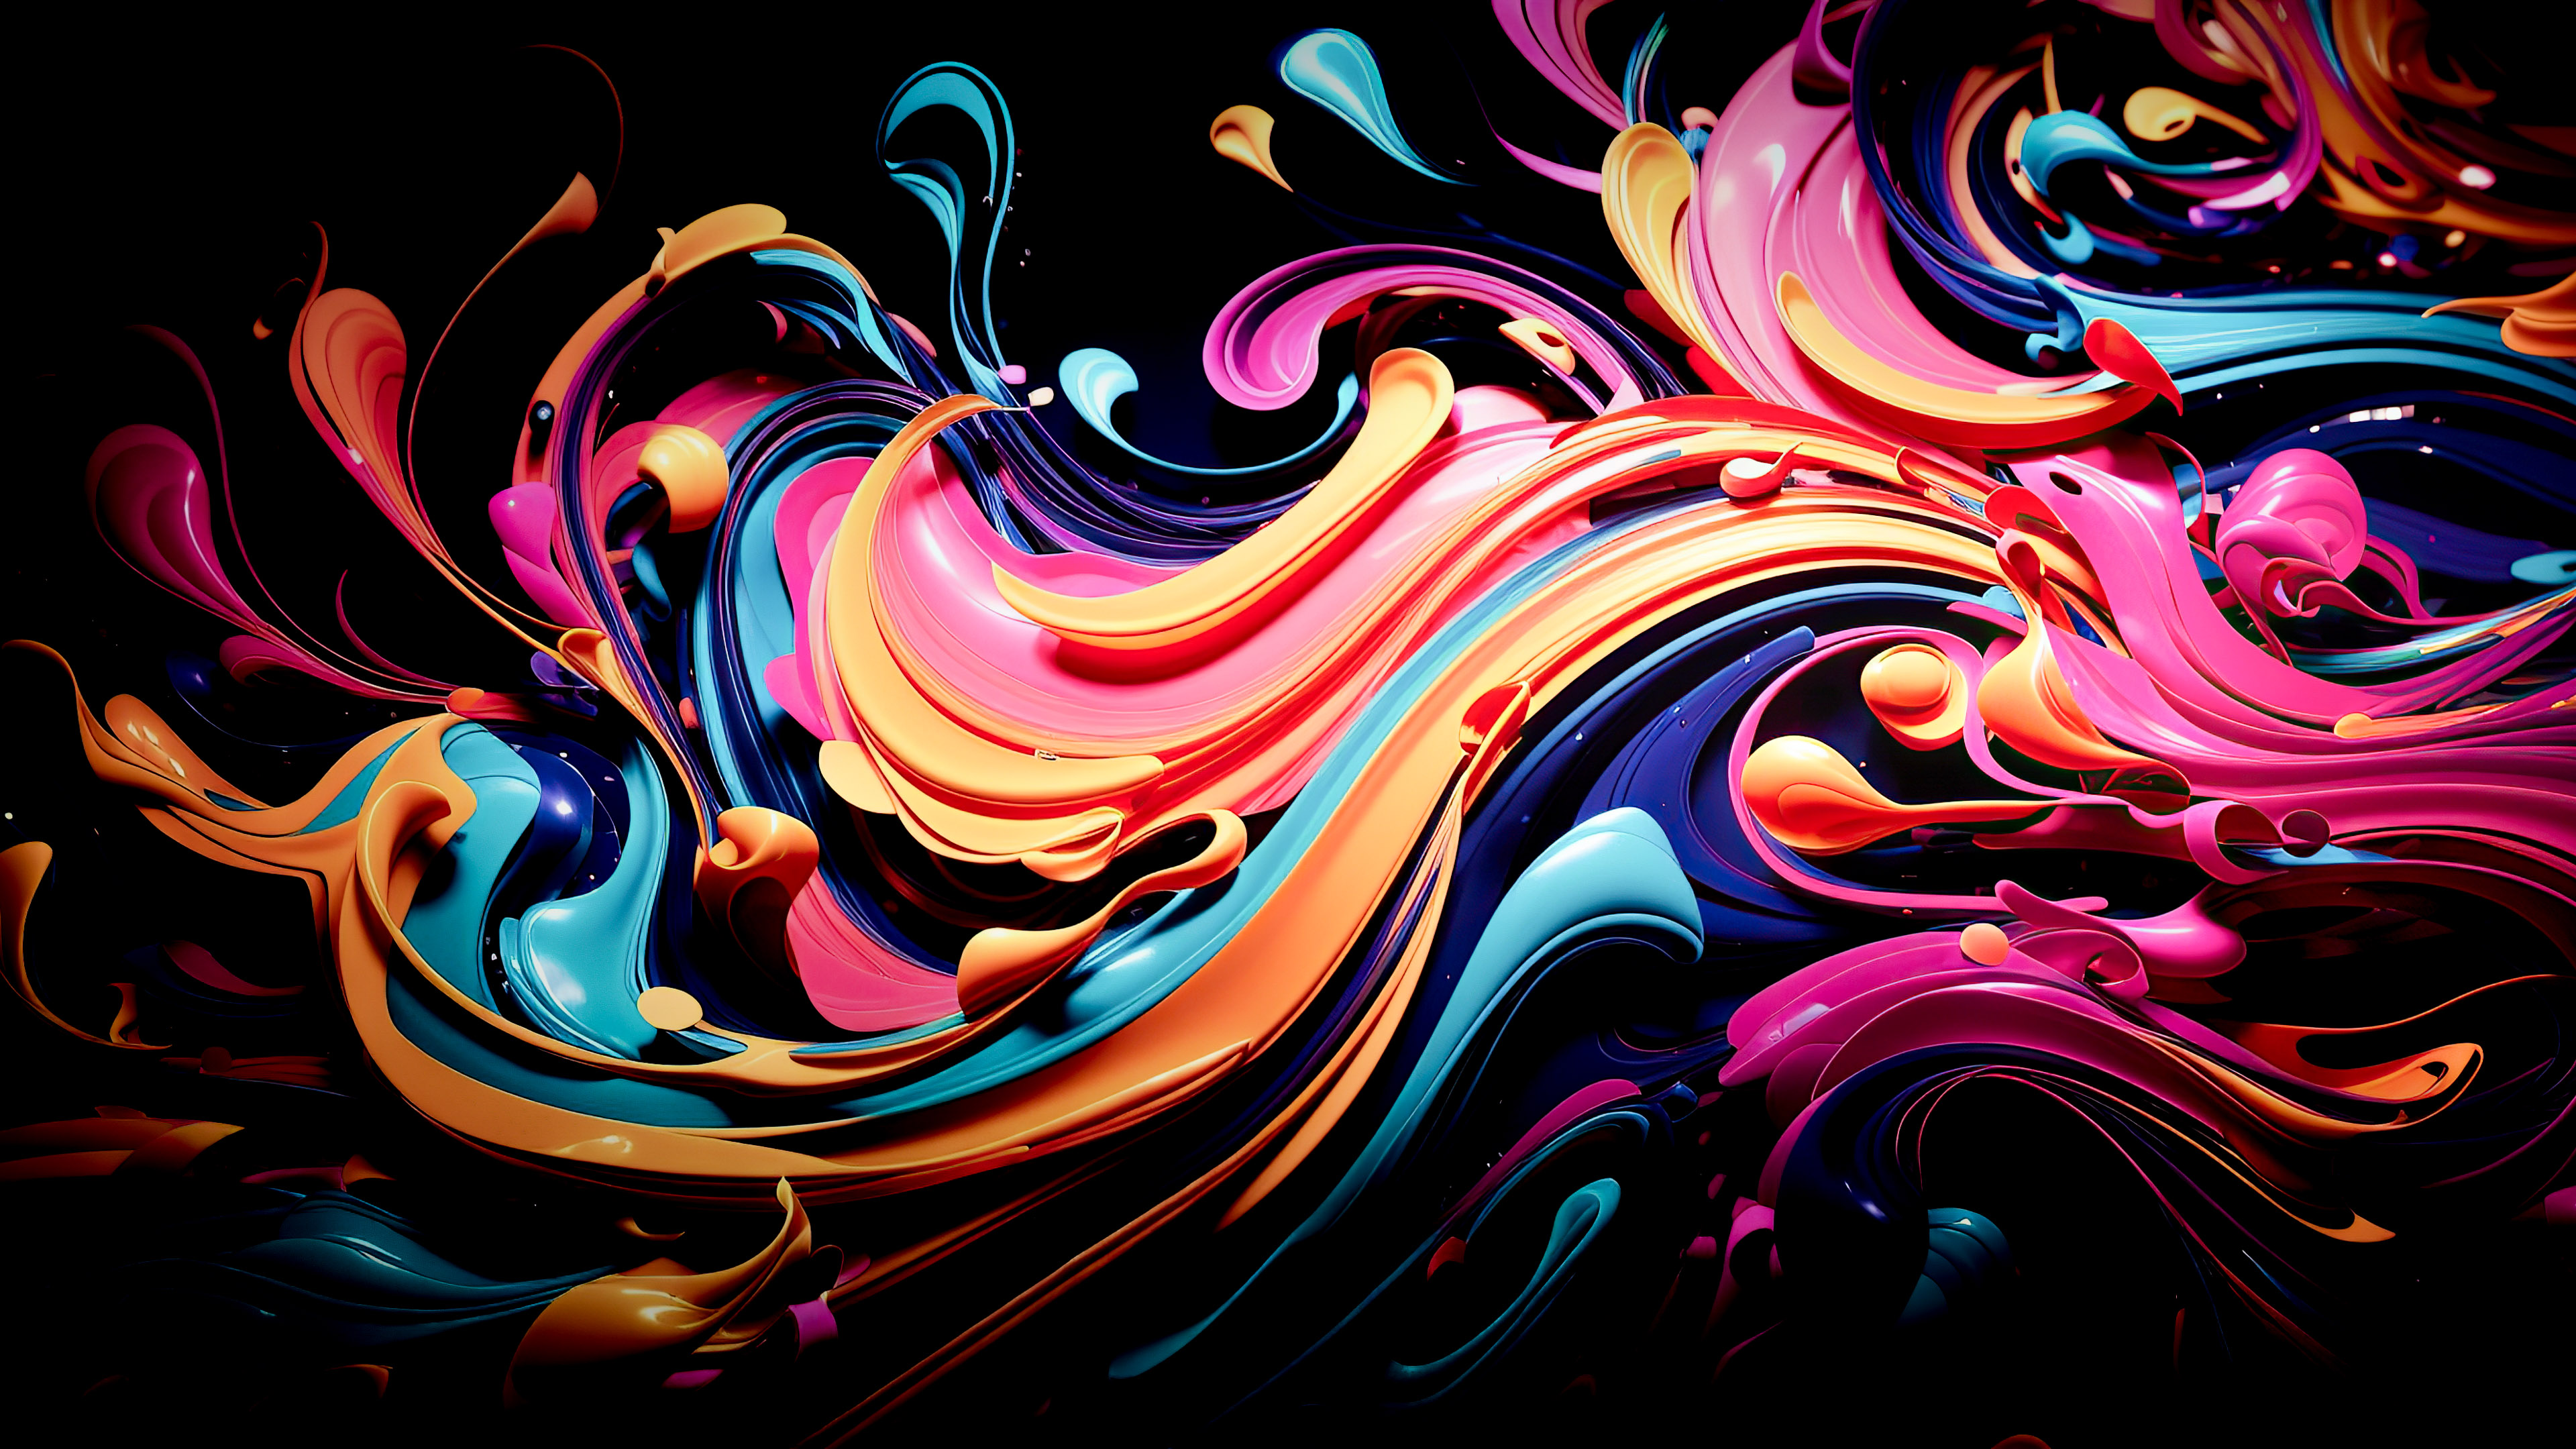 Experience the allure of darkness with our dark abstract wallpaper in 4K, showcasing vibrant swirls of neon colors.